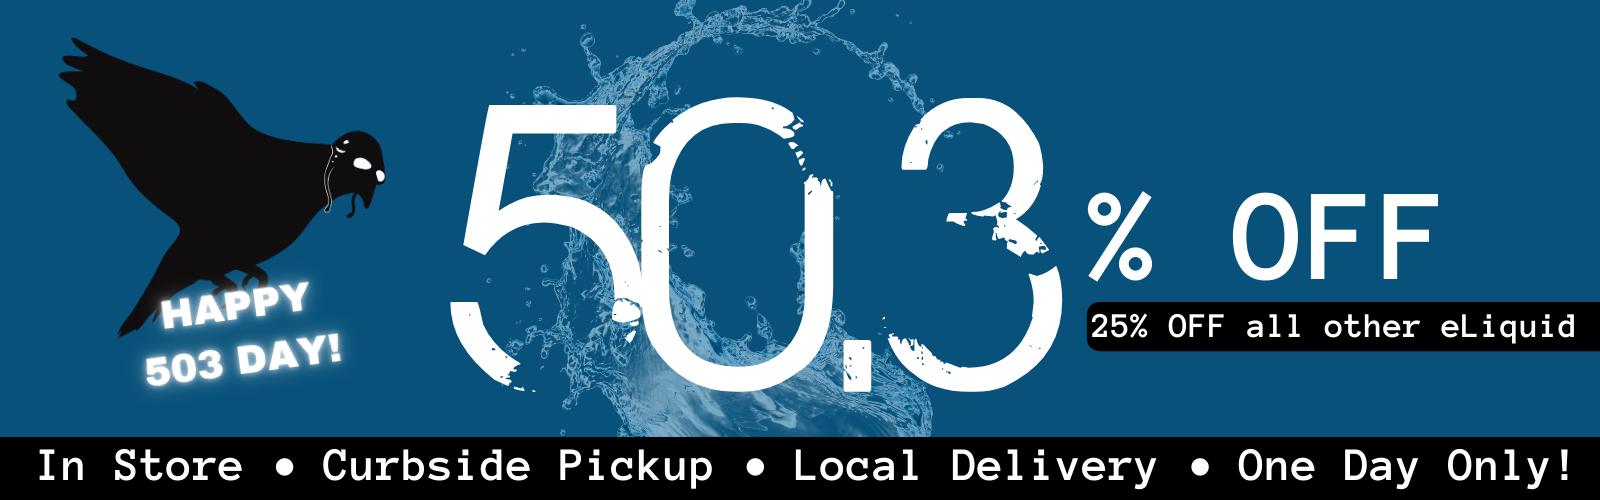 Happy 503 Day! 50.3% OFF all 503 eLiquid and 25% OFF all other eliquid In store Curbside and Local Delivery One Day Only